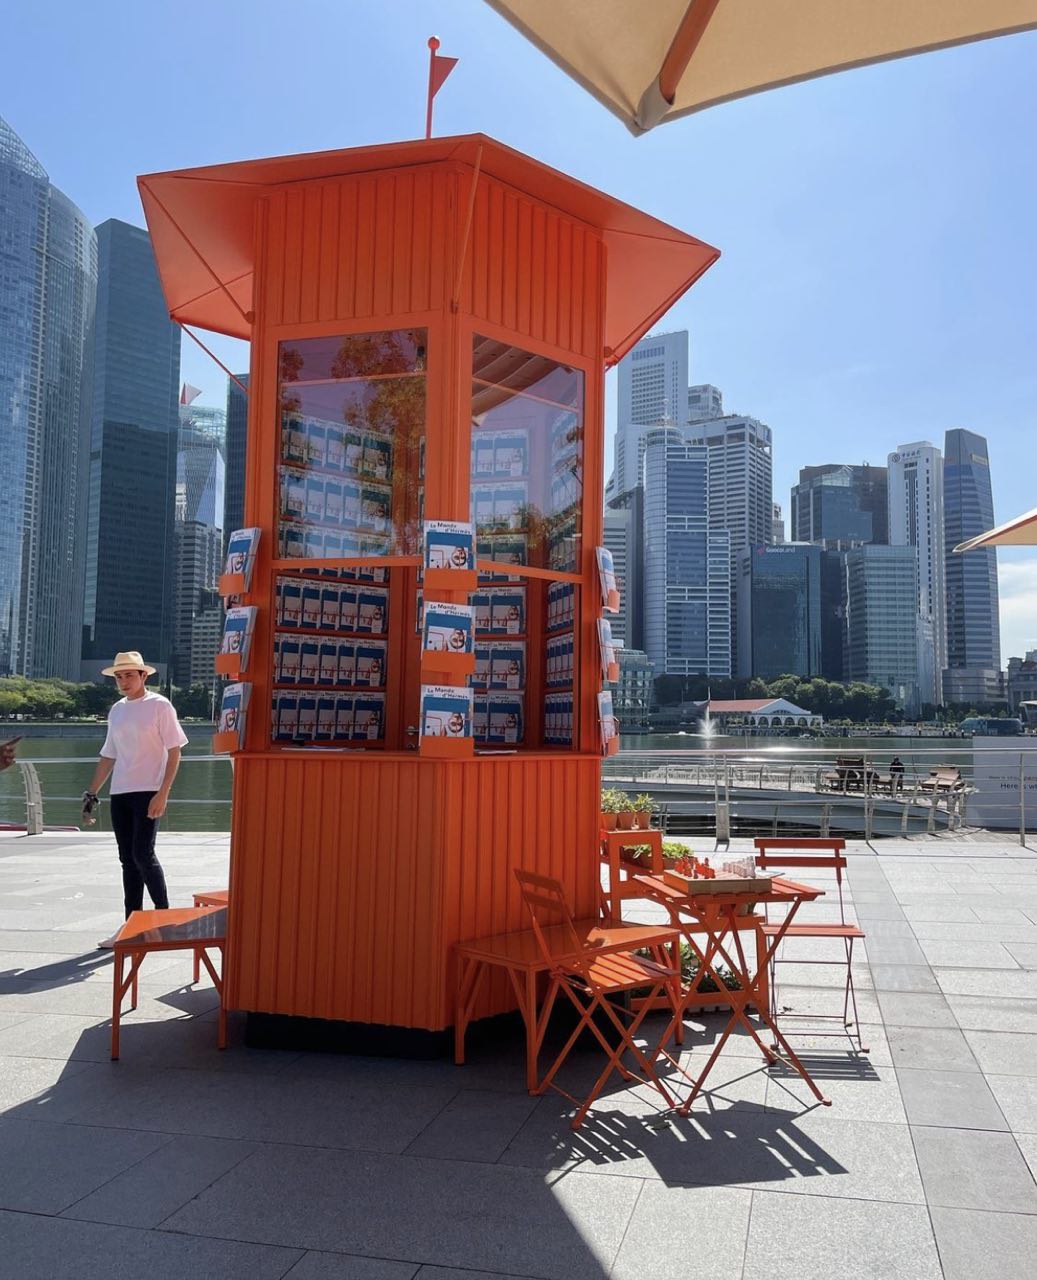 HERMÈS POP-UP AT MARINA BAY SANDS WITH FREE POTTED PLANTS, HAIKUS,  BALLOONS, CARICATURES & MORE! - Shout